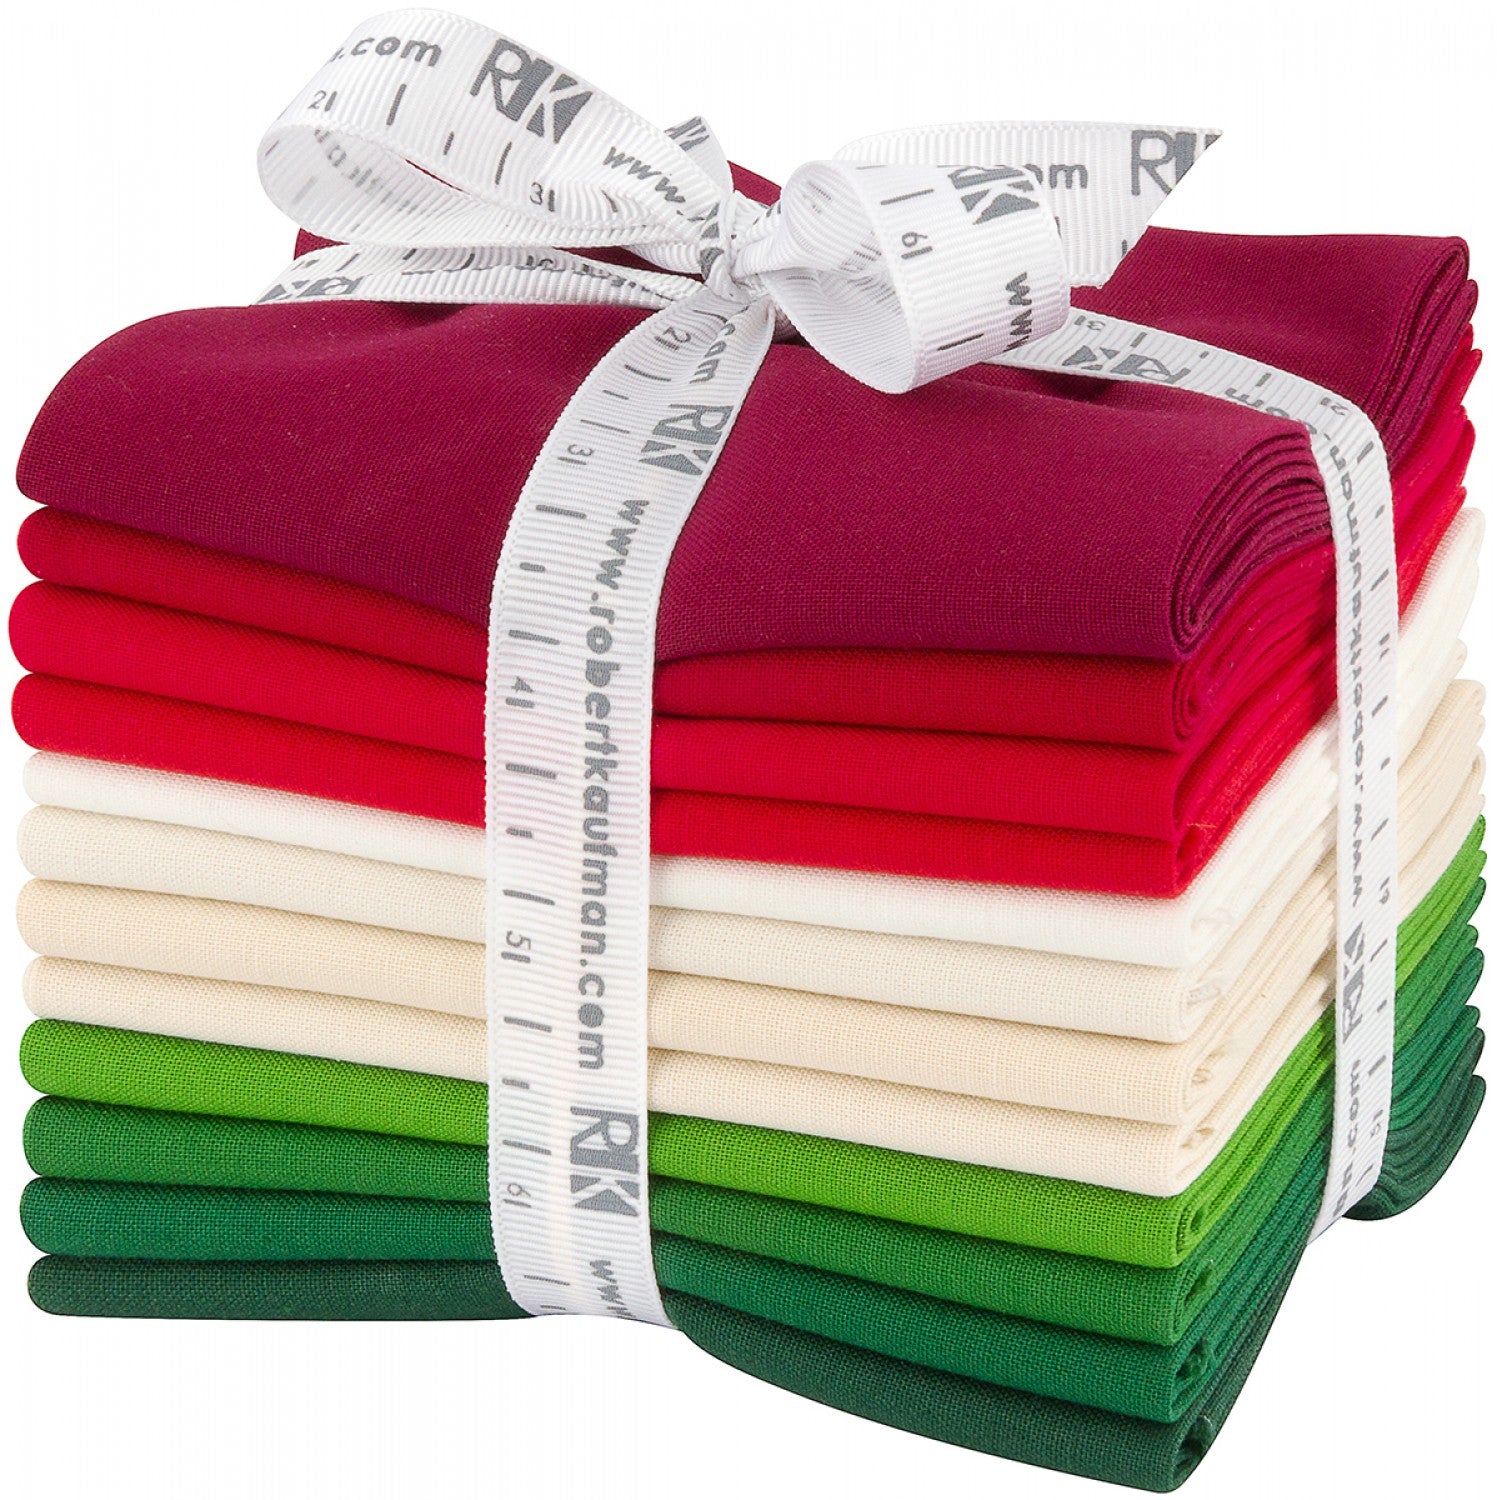 This Factory Cut FAT QUARTER BUNDLE contains 22 quilting cotton prints from Designer Essential Solids by Tula Pink for Freespirit Fabrics  Manufacturer: FreeSpirit Fabrics Designer: Tula Pink Collection: Designer Essential Solids Material: 100% Cotton  SKU: FB1FQTP.SOLID Weight: Quilting